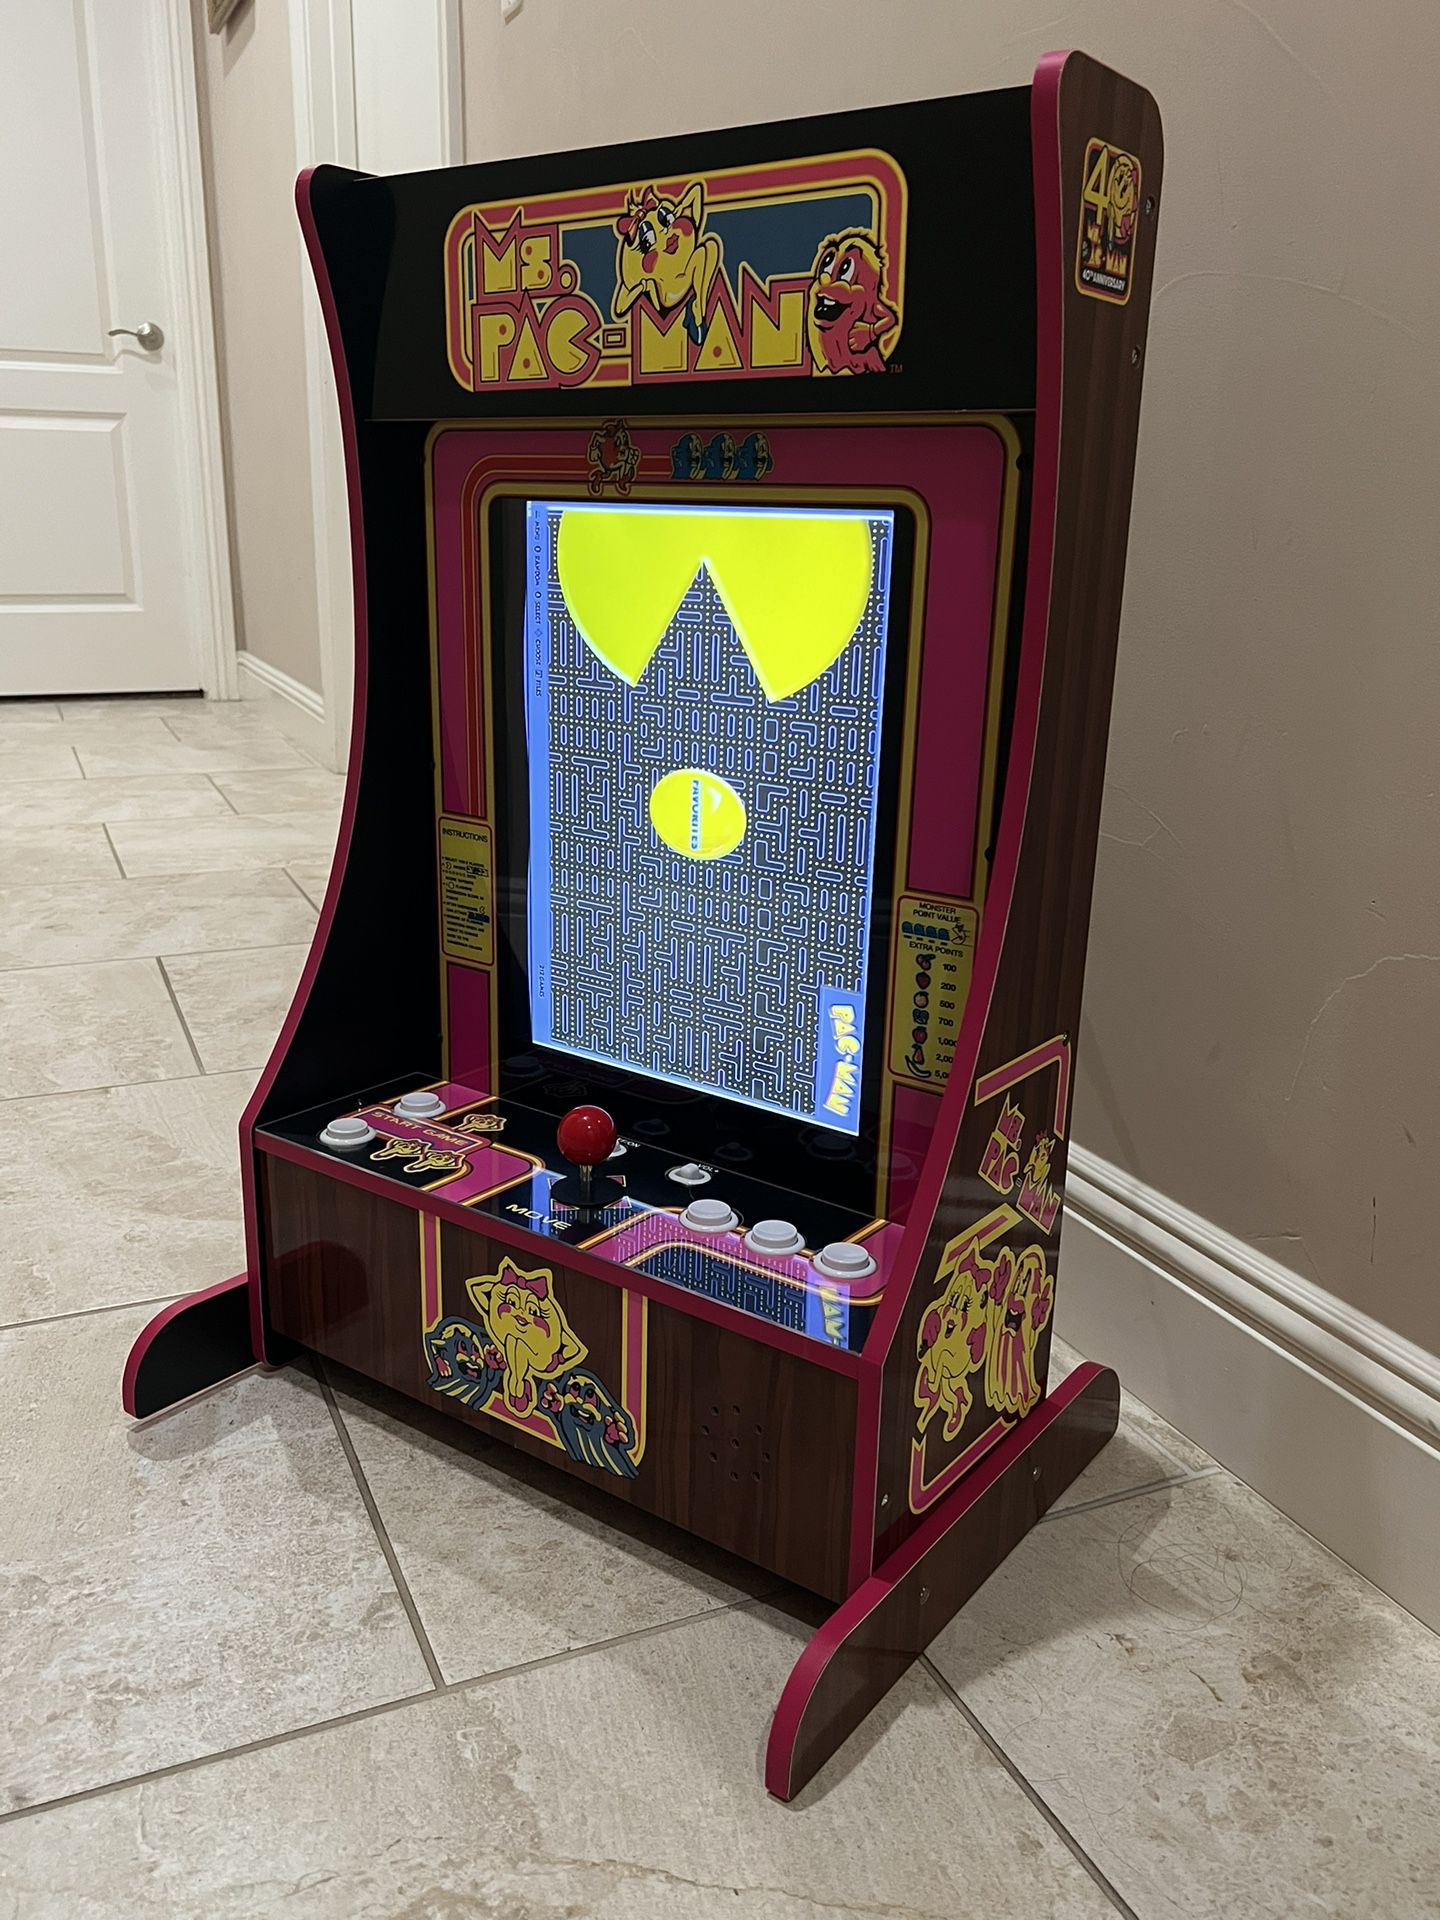 New Mod Arcade1Up Ms. Pac-Man Partycade Arcade Over 2,980+Vertical Games